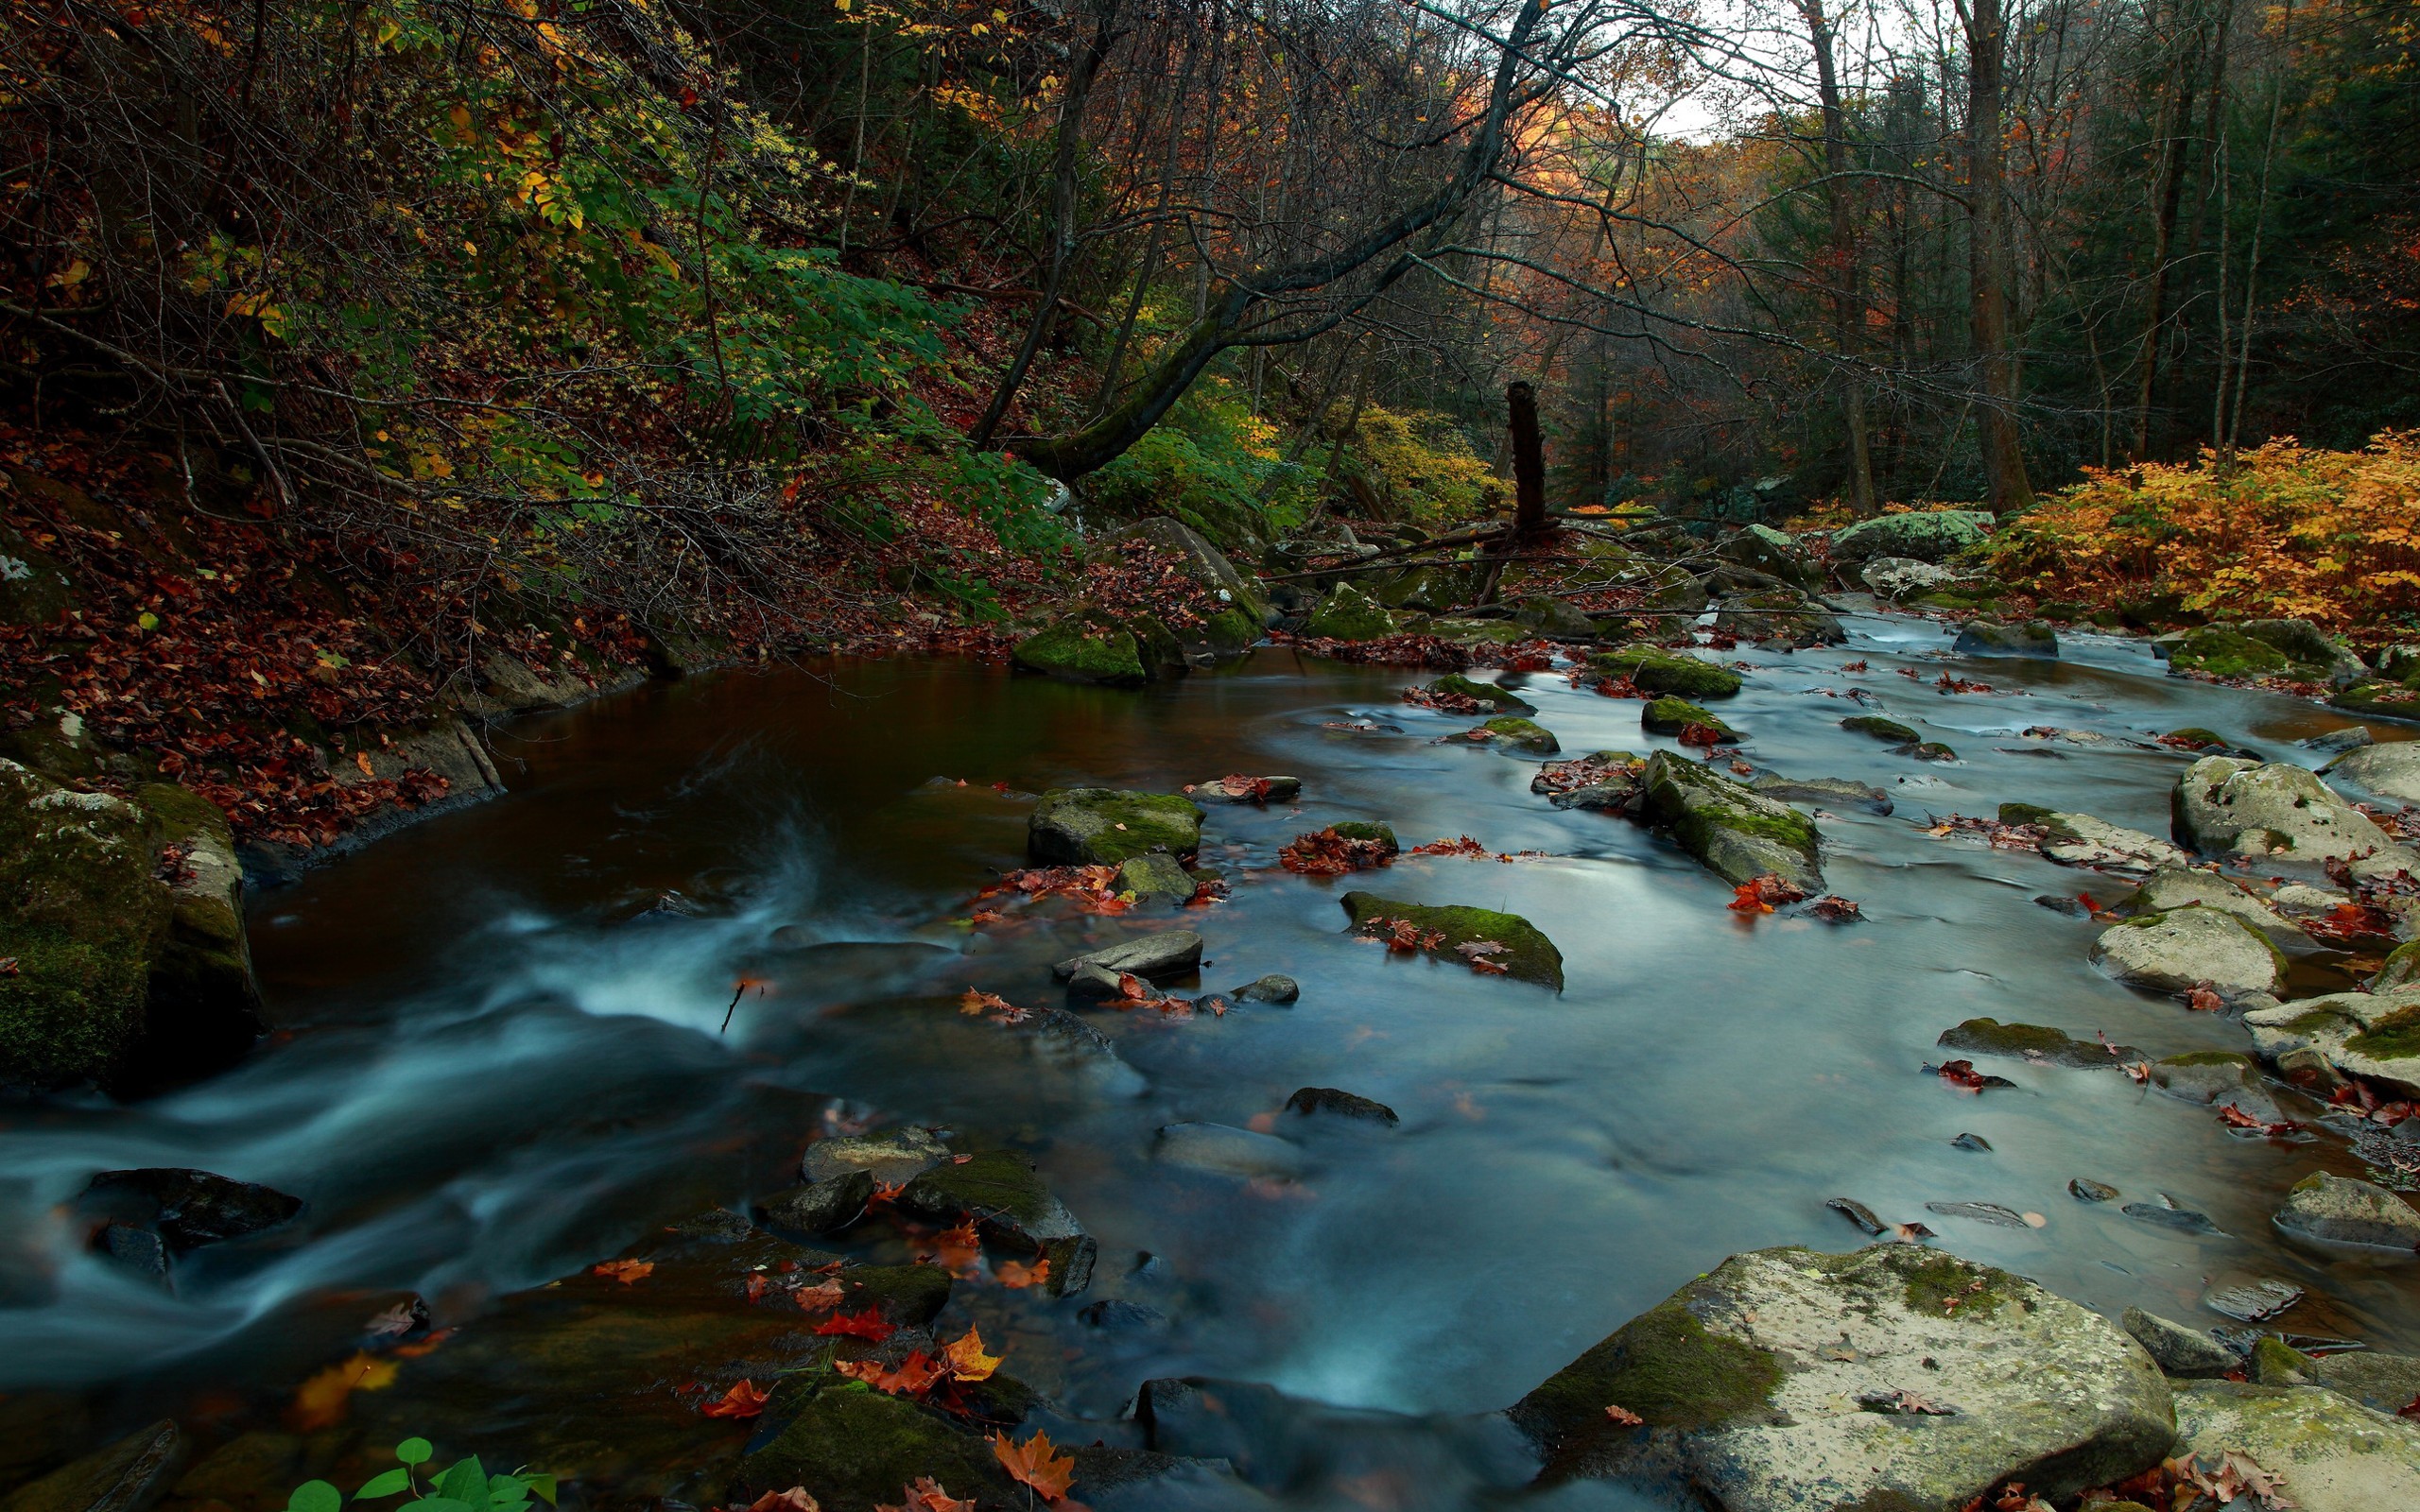 General 2560x1600 river nature forest leaves fall water rocks stones